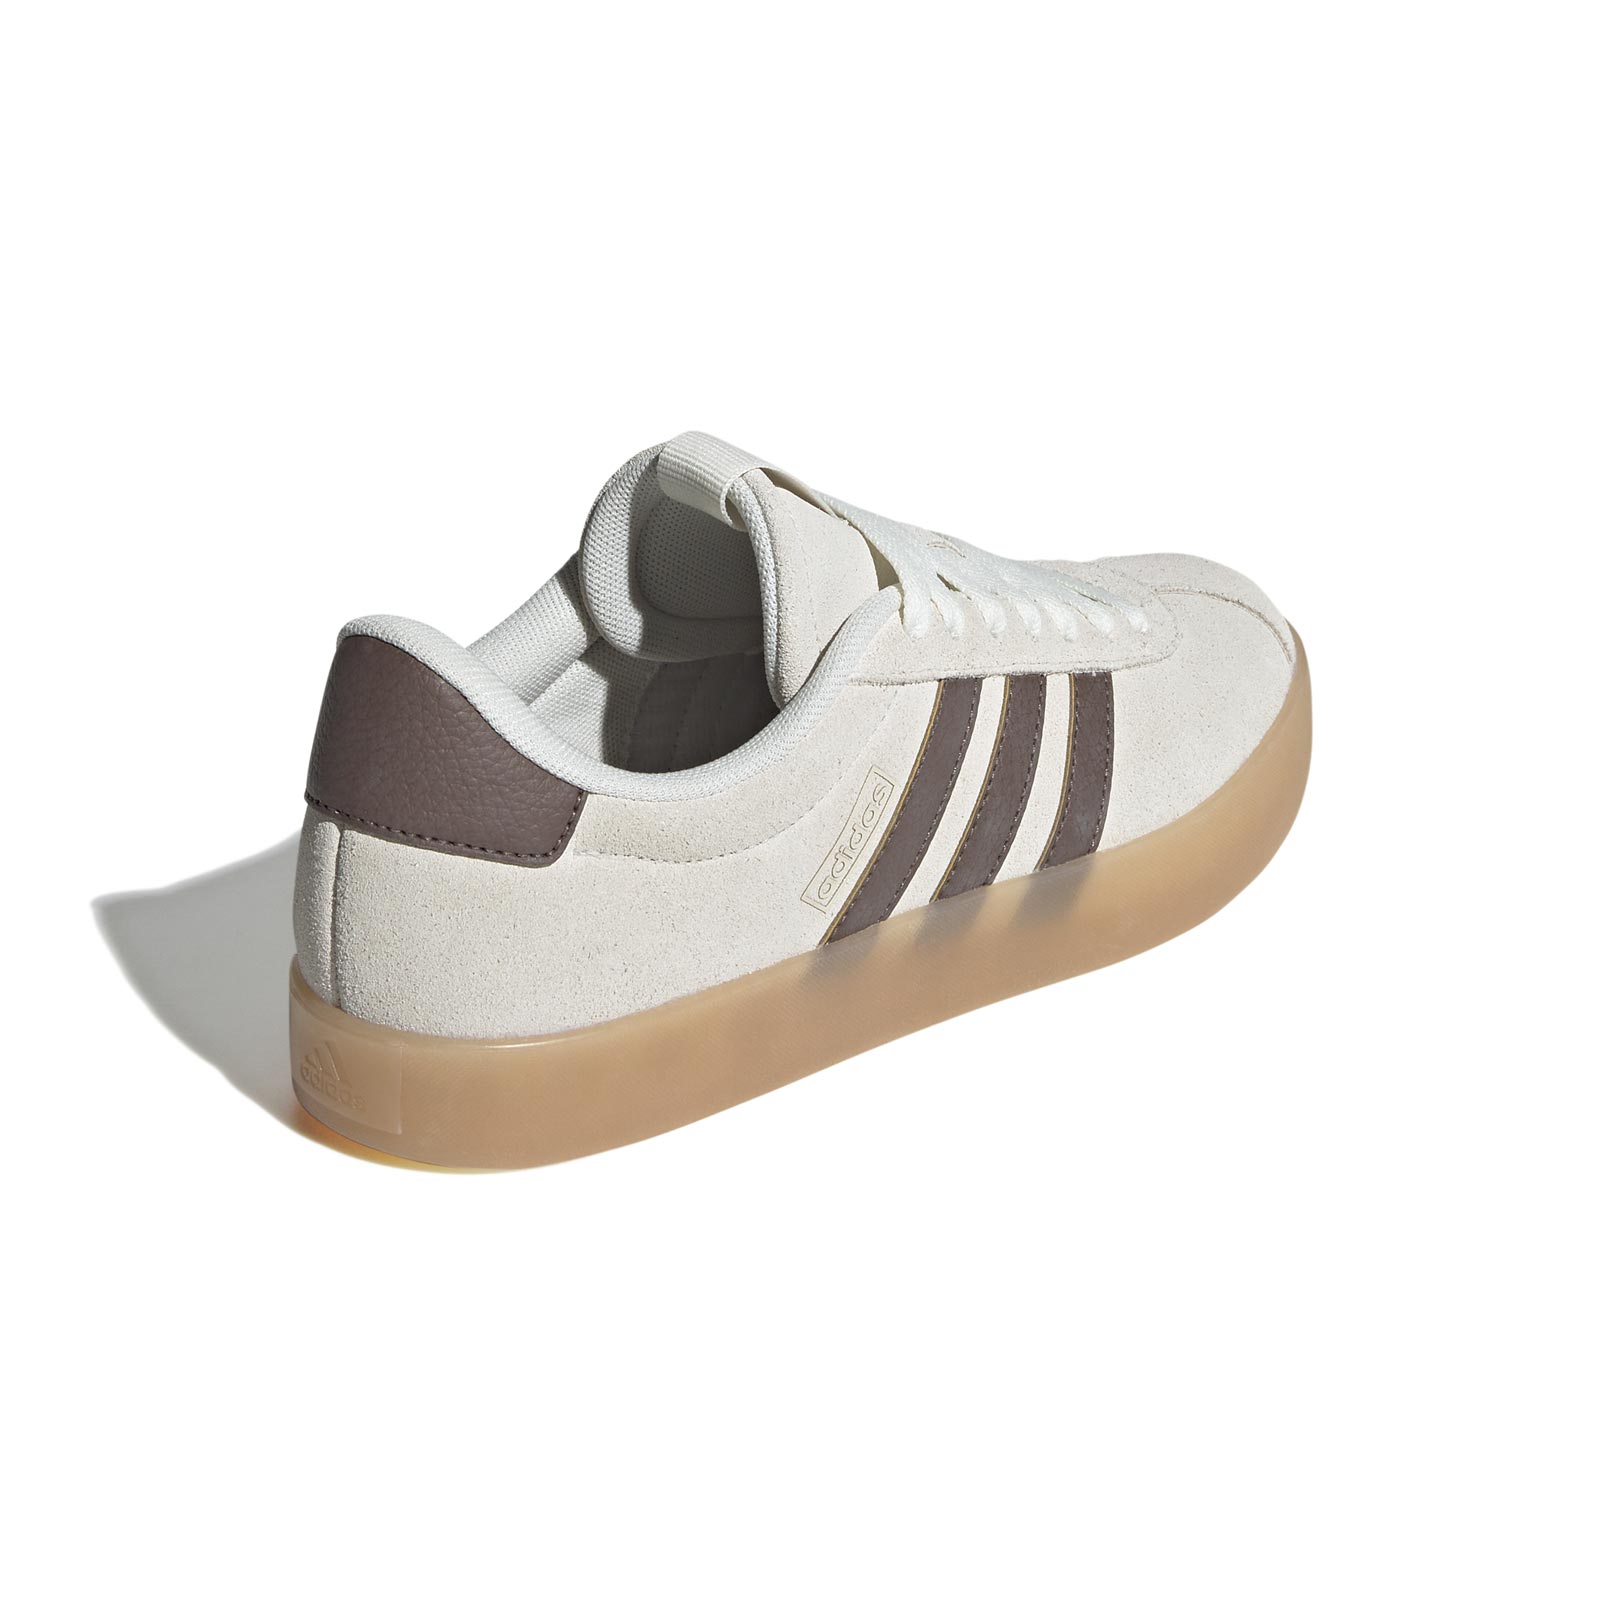 ADIDAS VL COURT 3.0 WOMENS SHOES